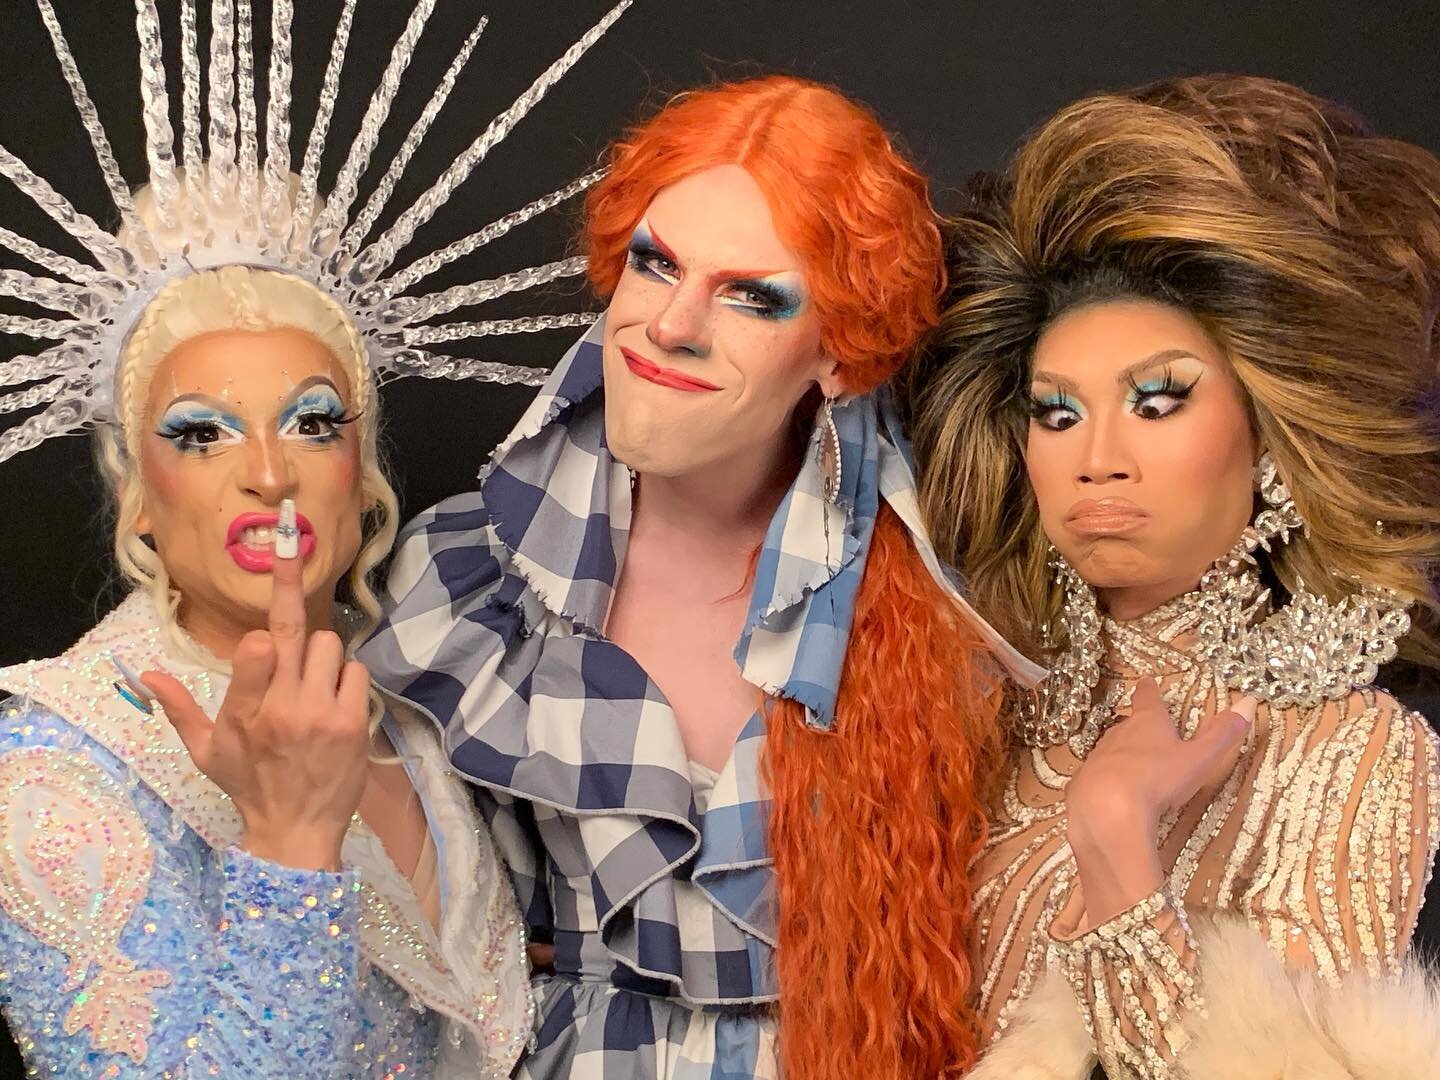 @denalifoxx we love you so much! Midwest sisters forever! Queen of the Ice, Kook and Miss KAH together for life 💙🧡🤍 
📸: @adamouahmane 
#midwestsisters